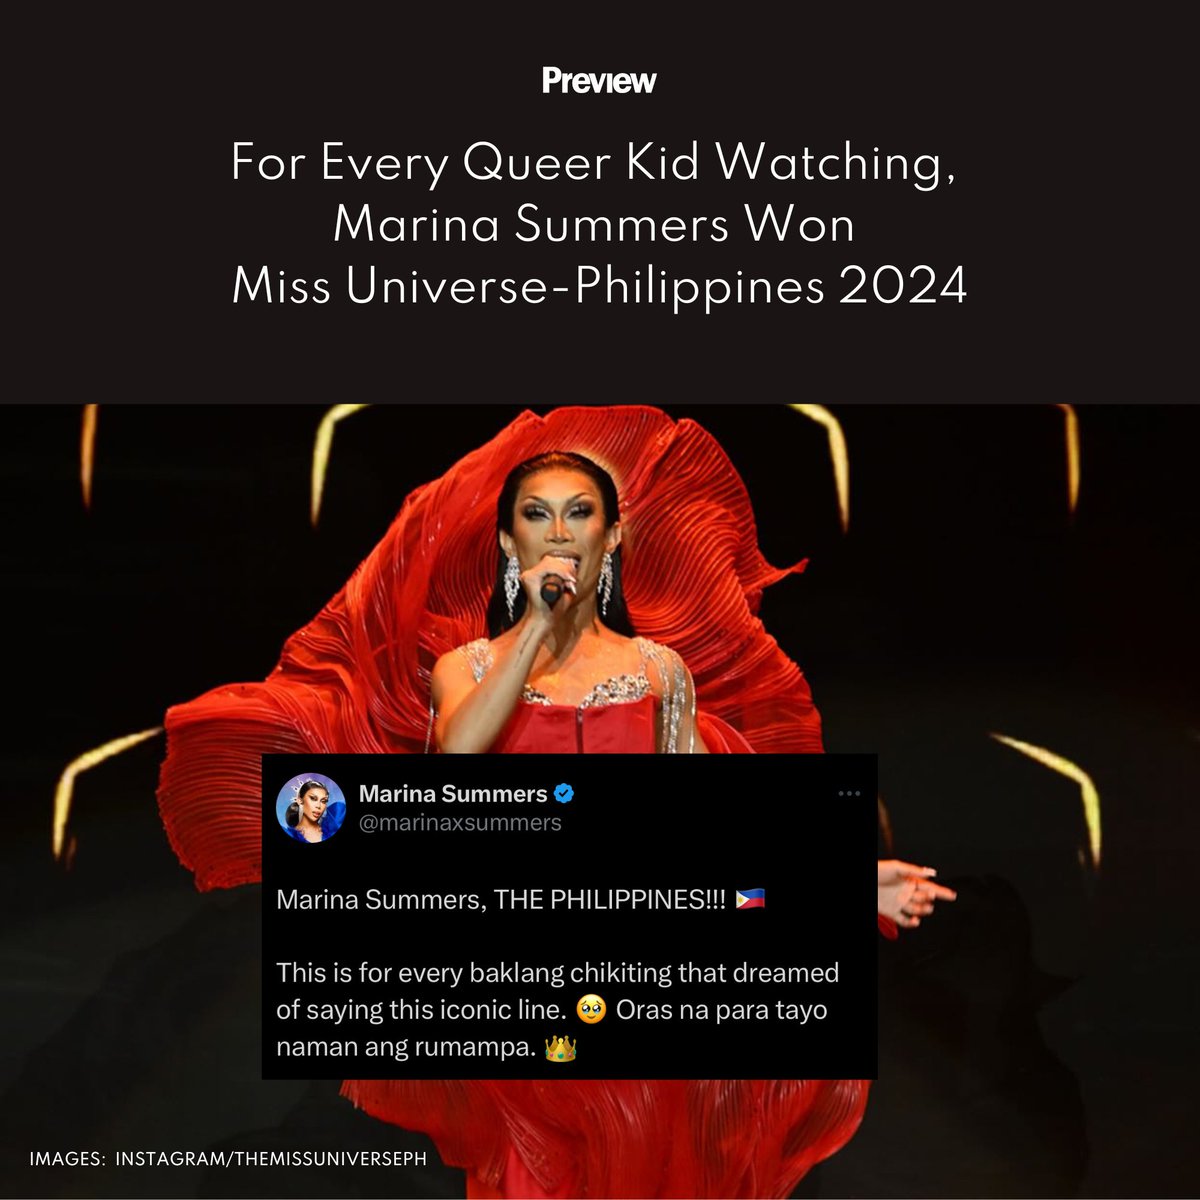 What really left an imprint on queer viewers of #MUPH2024TheCoronation was the opening number by Drag Race alum #MarinaSummers. Click here to see how she won the night in the eyes of the LGBTQIA+ community: bit.ly/3V8UZb8